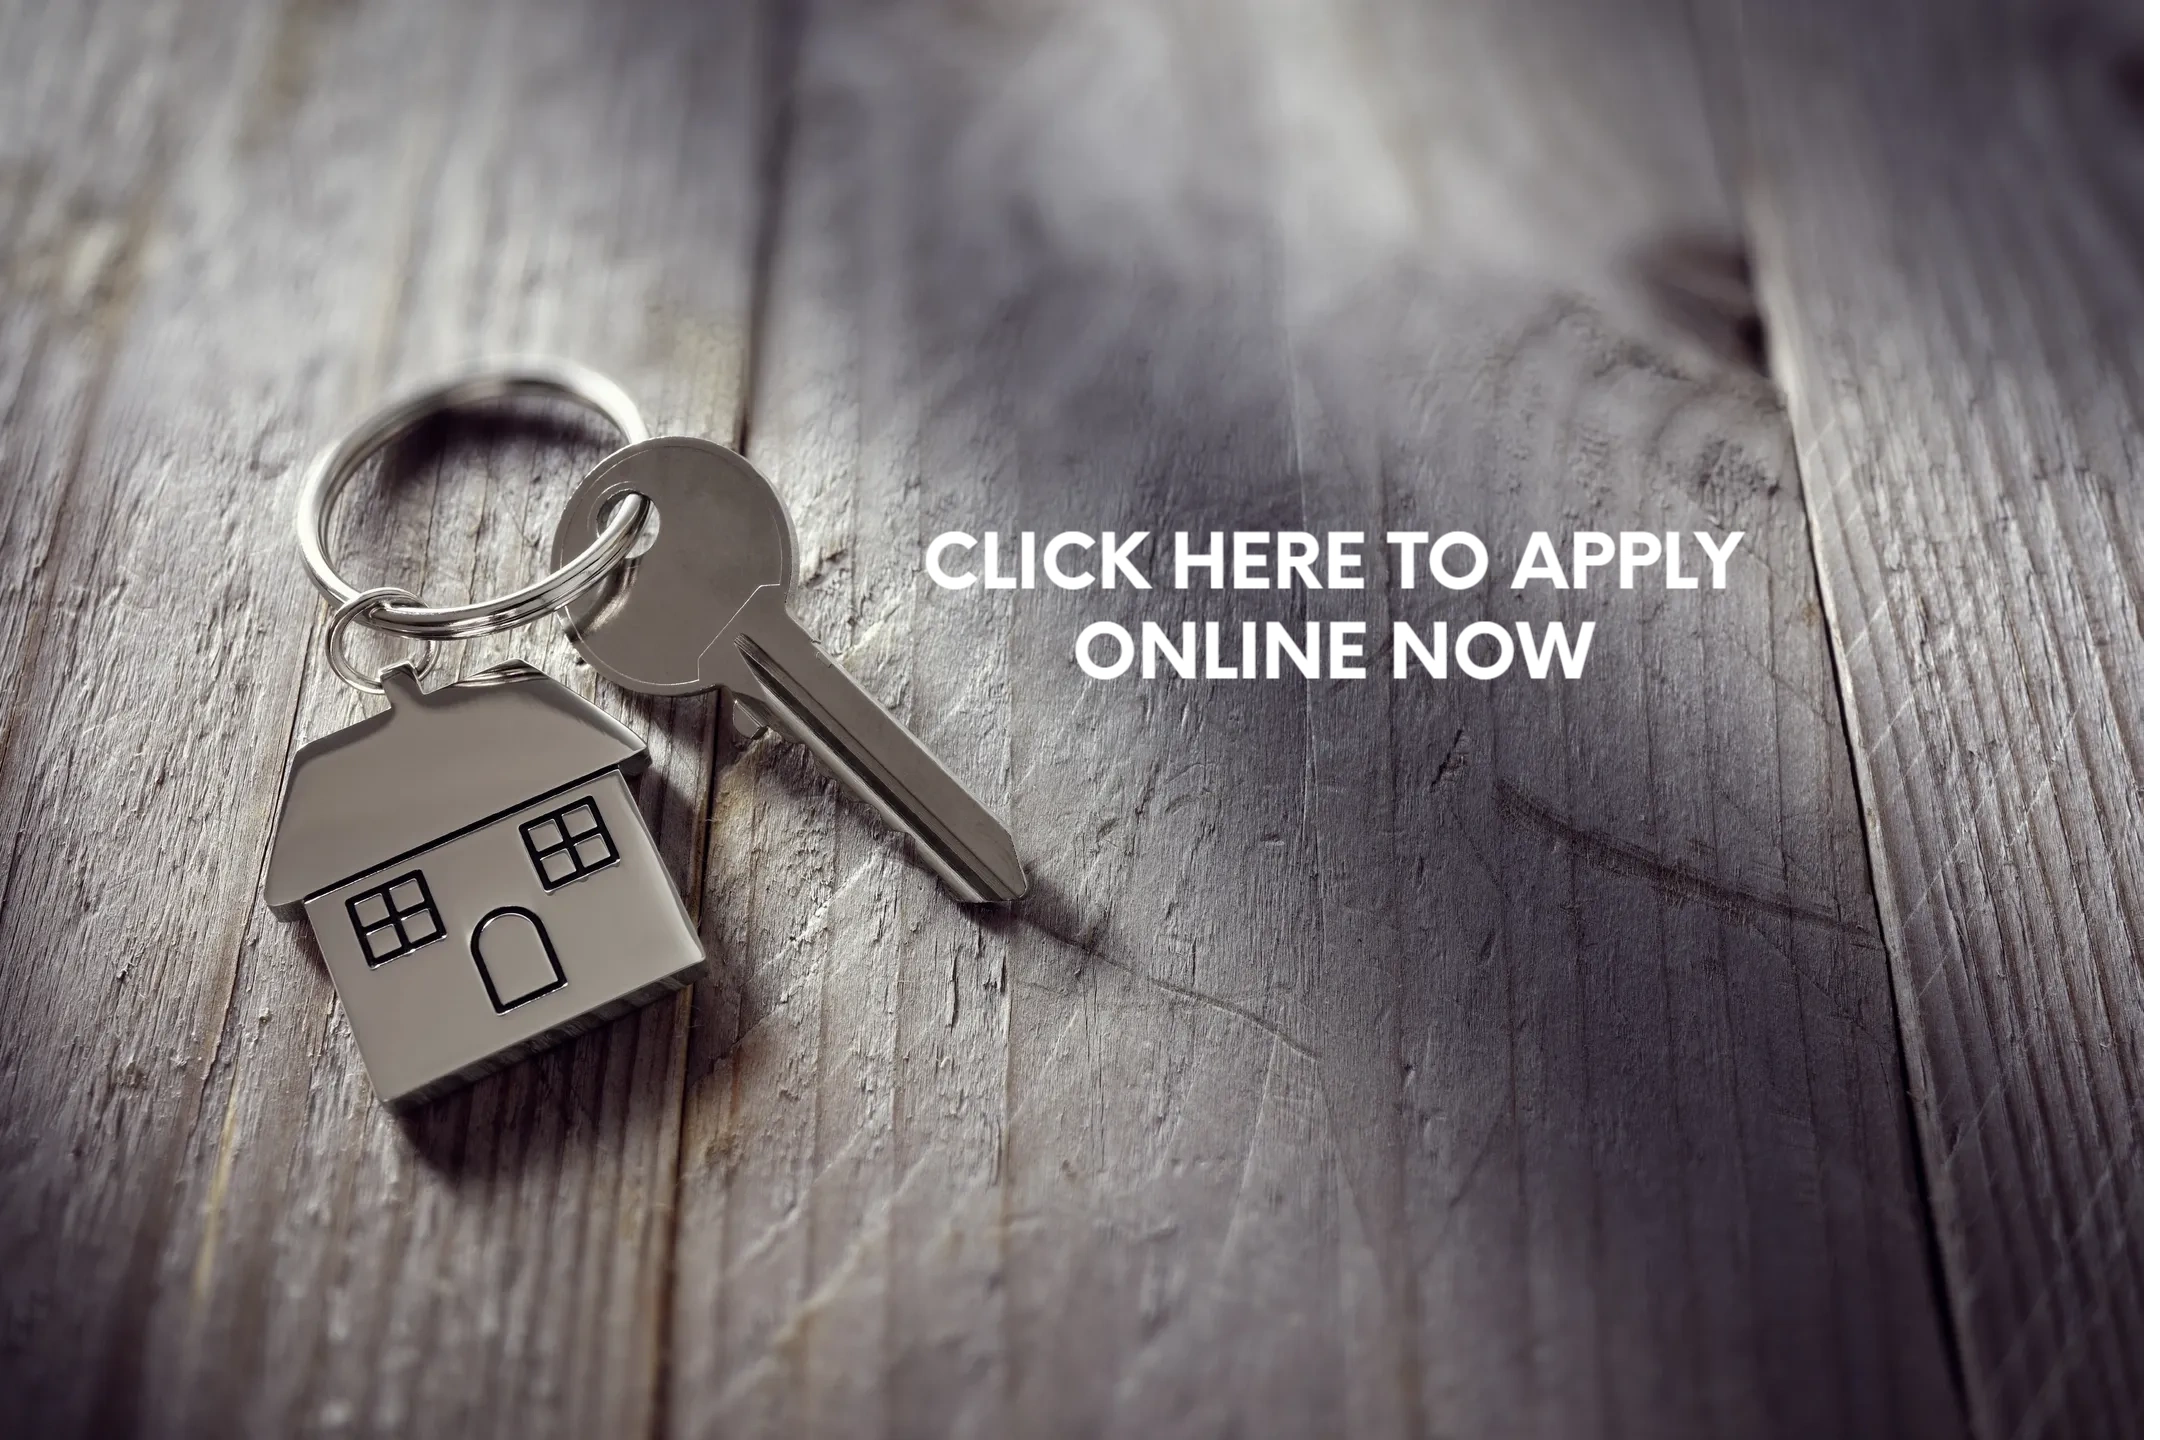 Sober Living Home Online Application. Transition House. Halfway House. Twin Falls, ID.